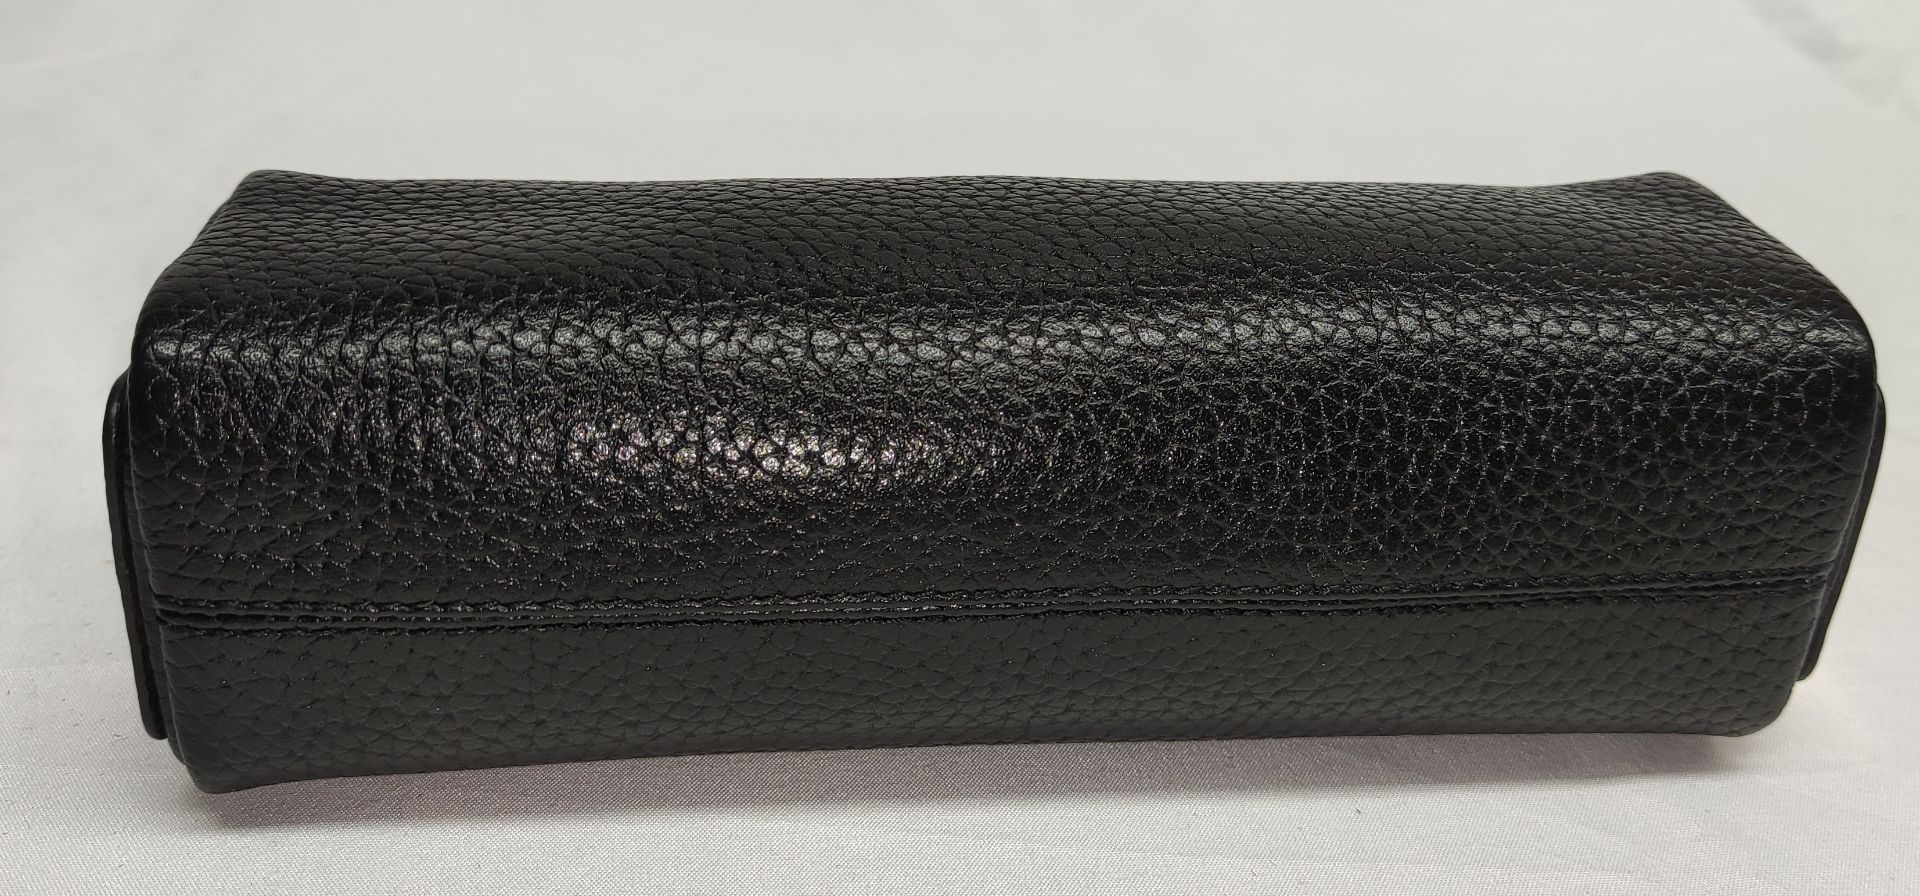 1 x ASPINAL OF LONDON Small London Case In Black Pebble - Boxed - Original RRP £75 - Ref: 6852686/ - Image 3 of 14